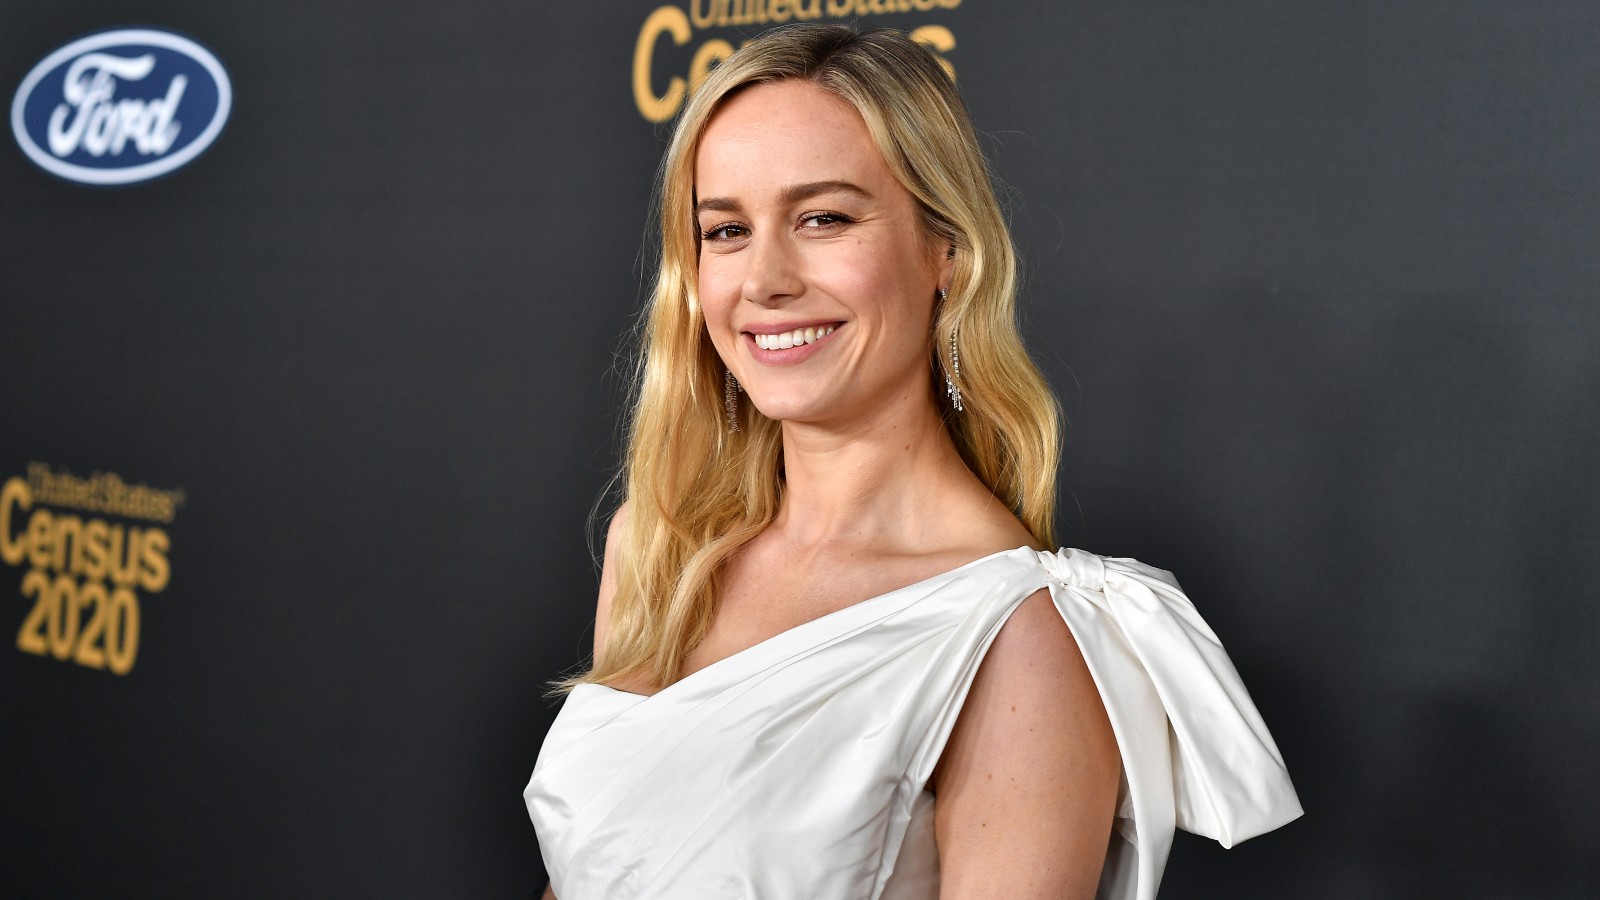 Brie Larson shares BTS snaps from ‘Fast X’ after working furiously all day